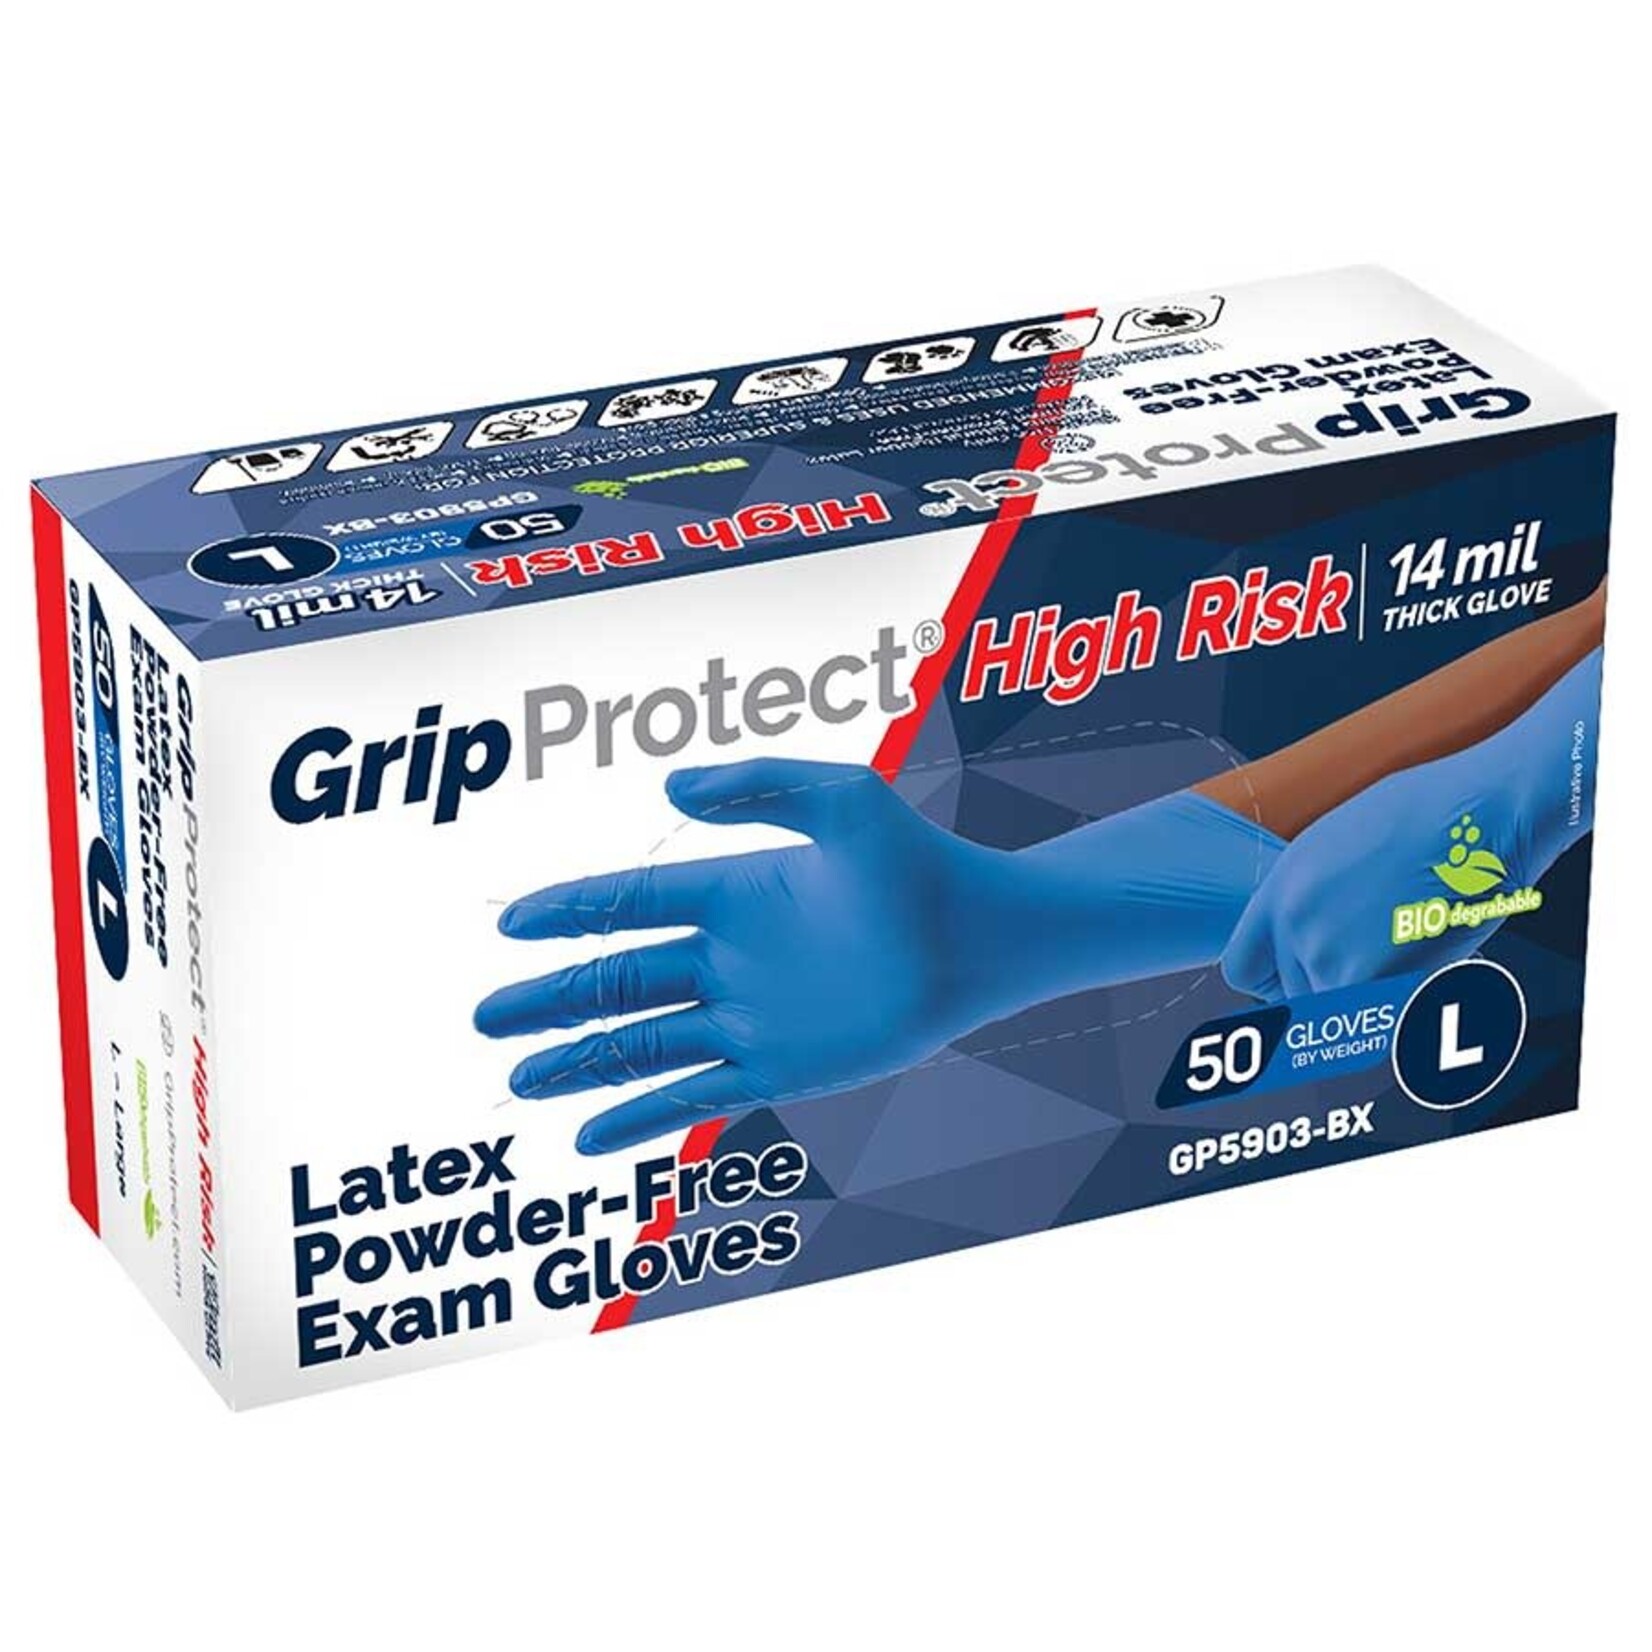 BMC Protect GripProtect High Risk 14 Mil Latex Powder-Free Exam Gloves, Blue, XL (Case of 10 Boxes)